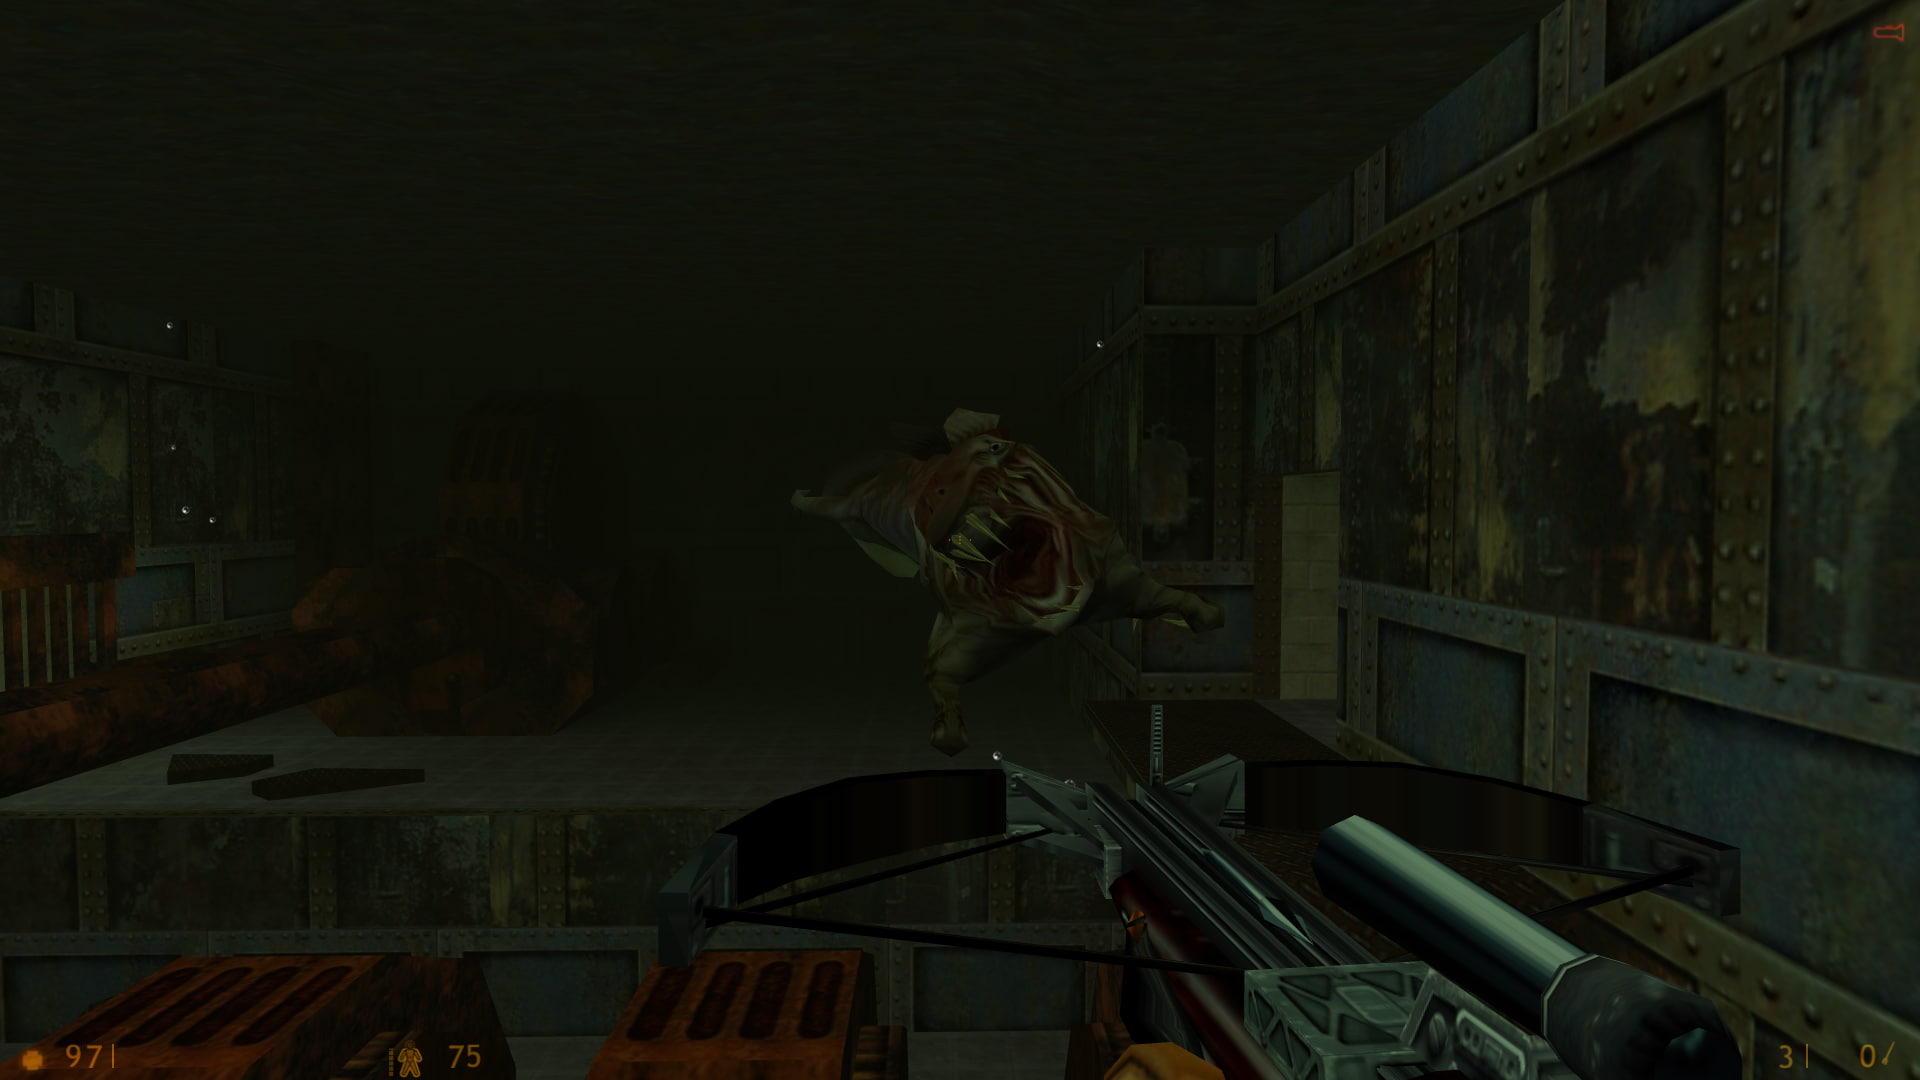 A screenshot of Half-Life. An ichthyosaur, a shark-like alien sea creature, swims towards the player with its mouth open in dark, muddy waters.